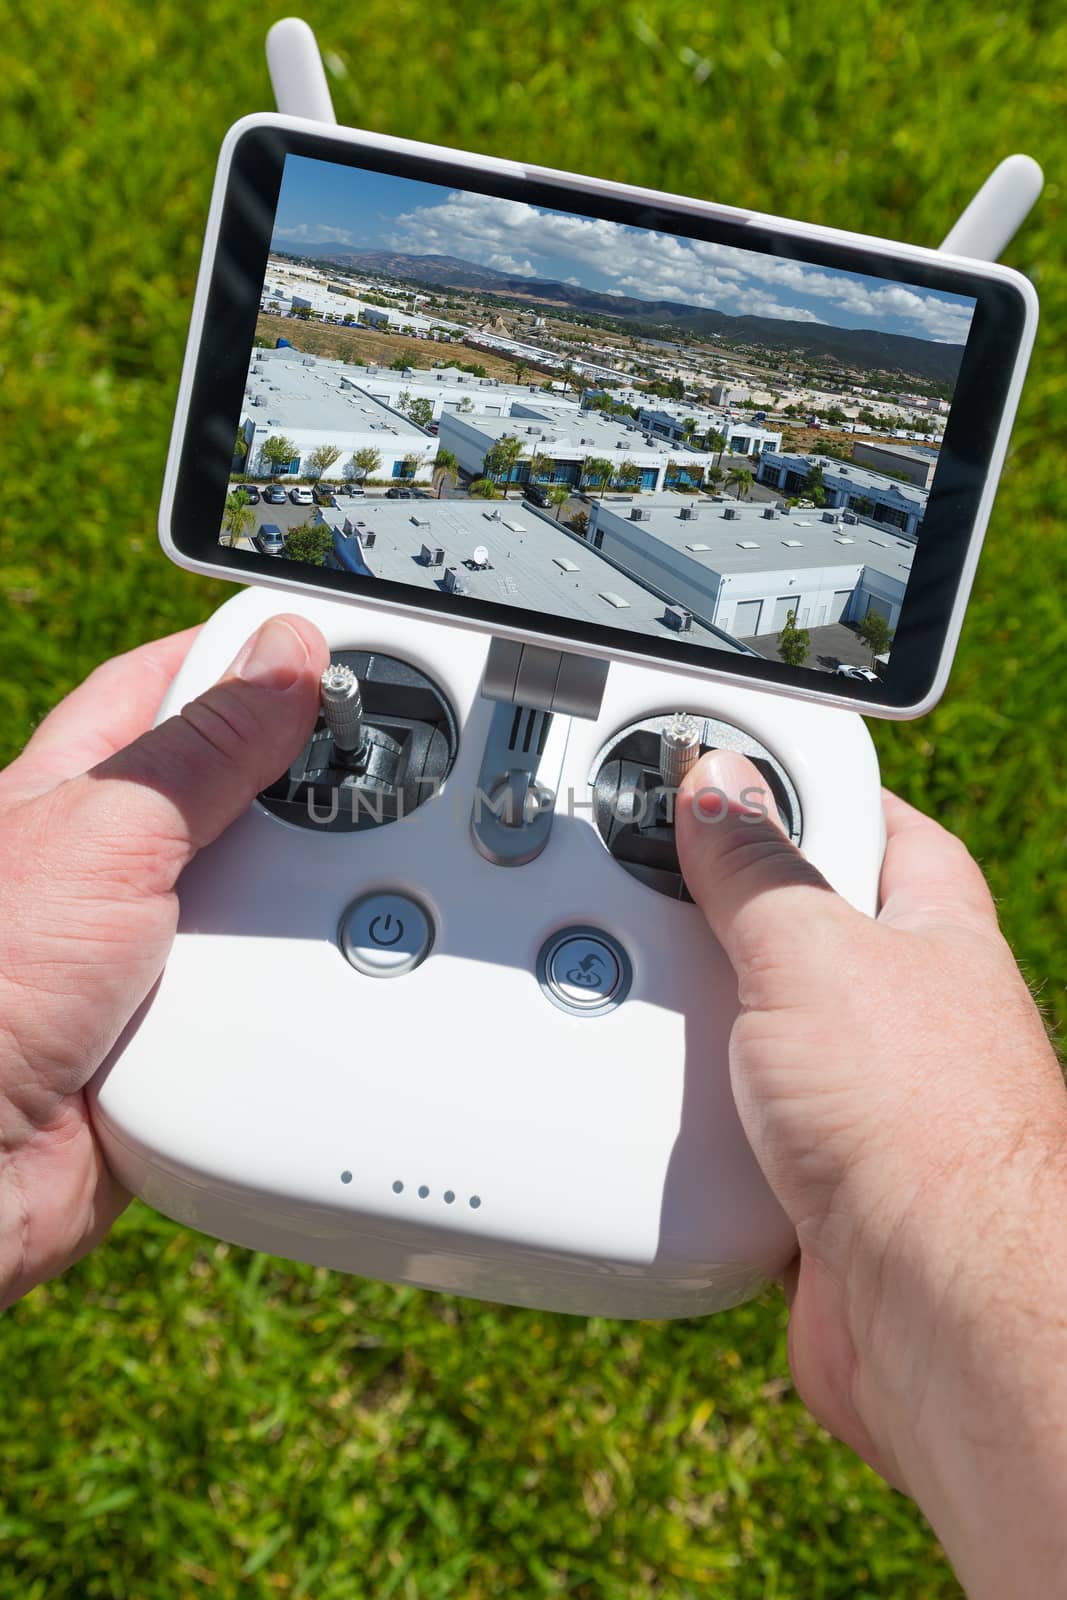 Hands Holding Drone Quadcopter Controller With Indutrial Buildings on Screen.